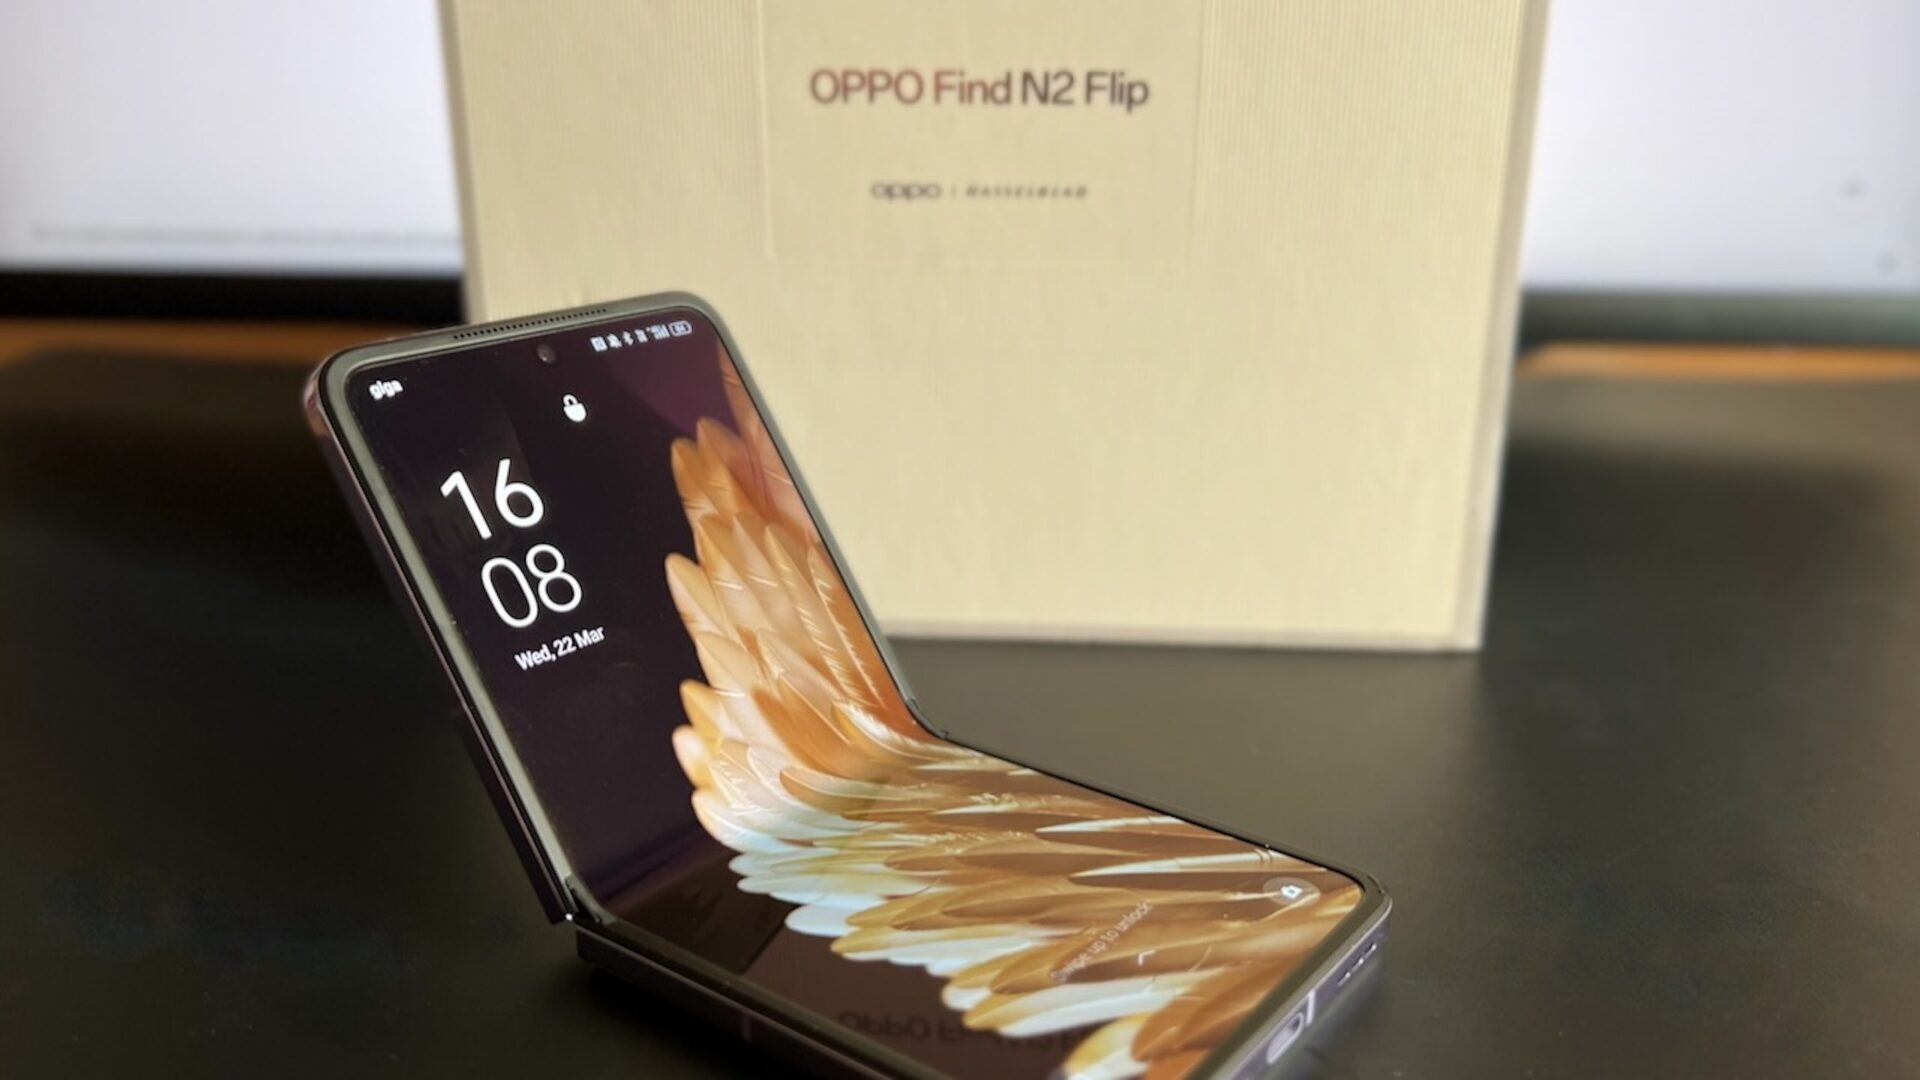 Oppo Find N2 Flip Review: Oppo Has Outdone Themselves